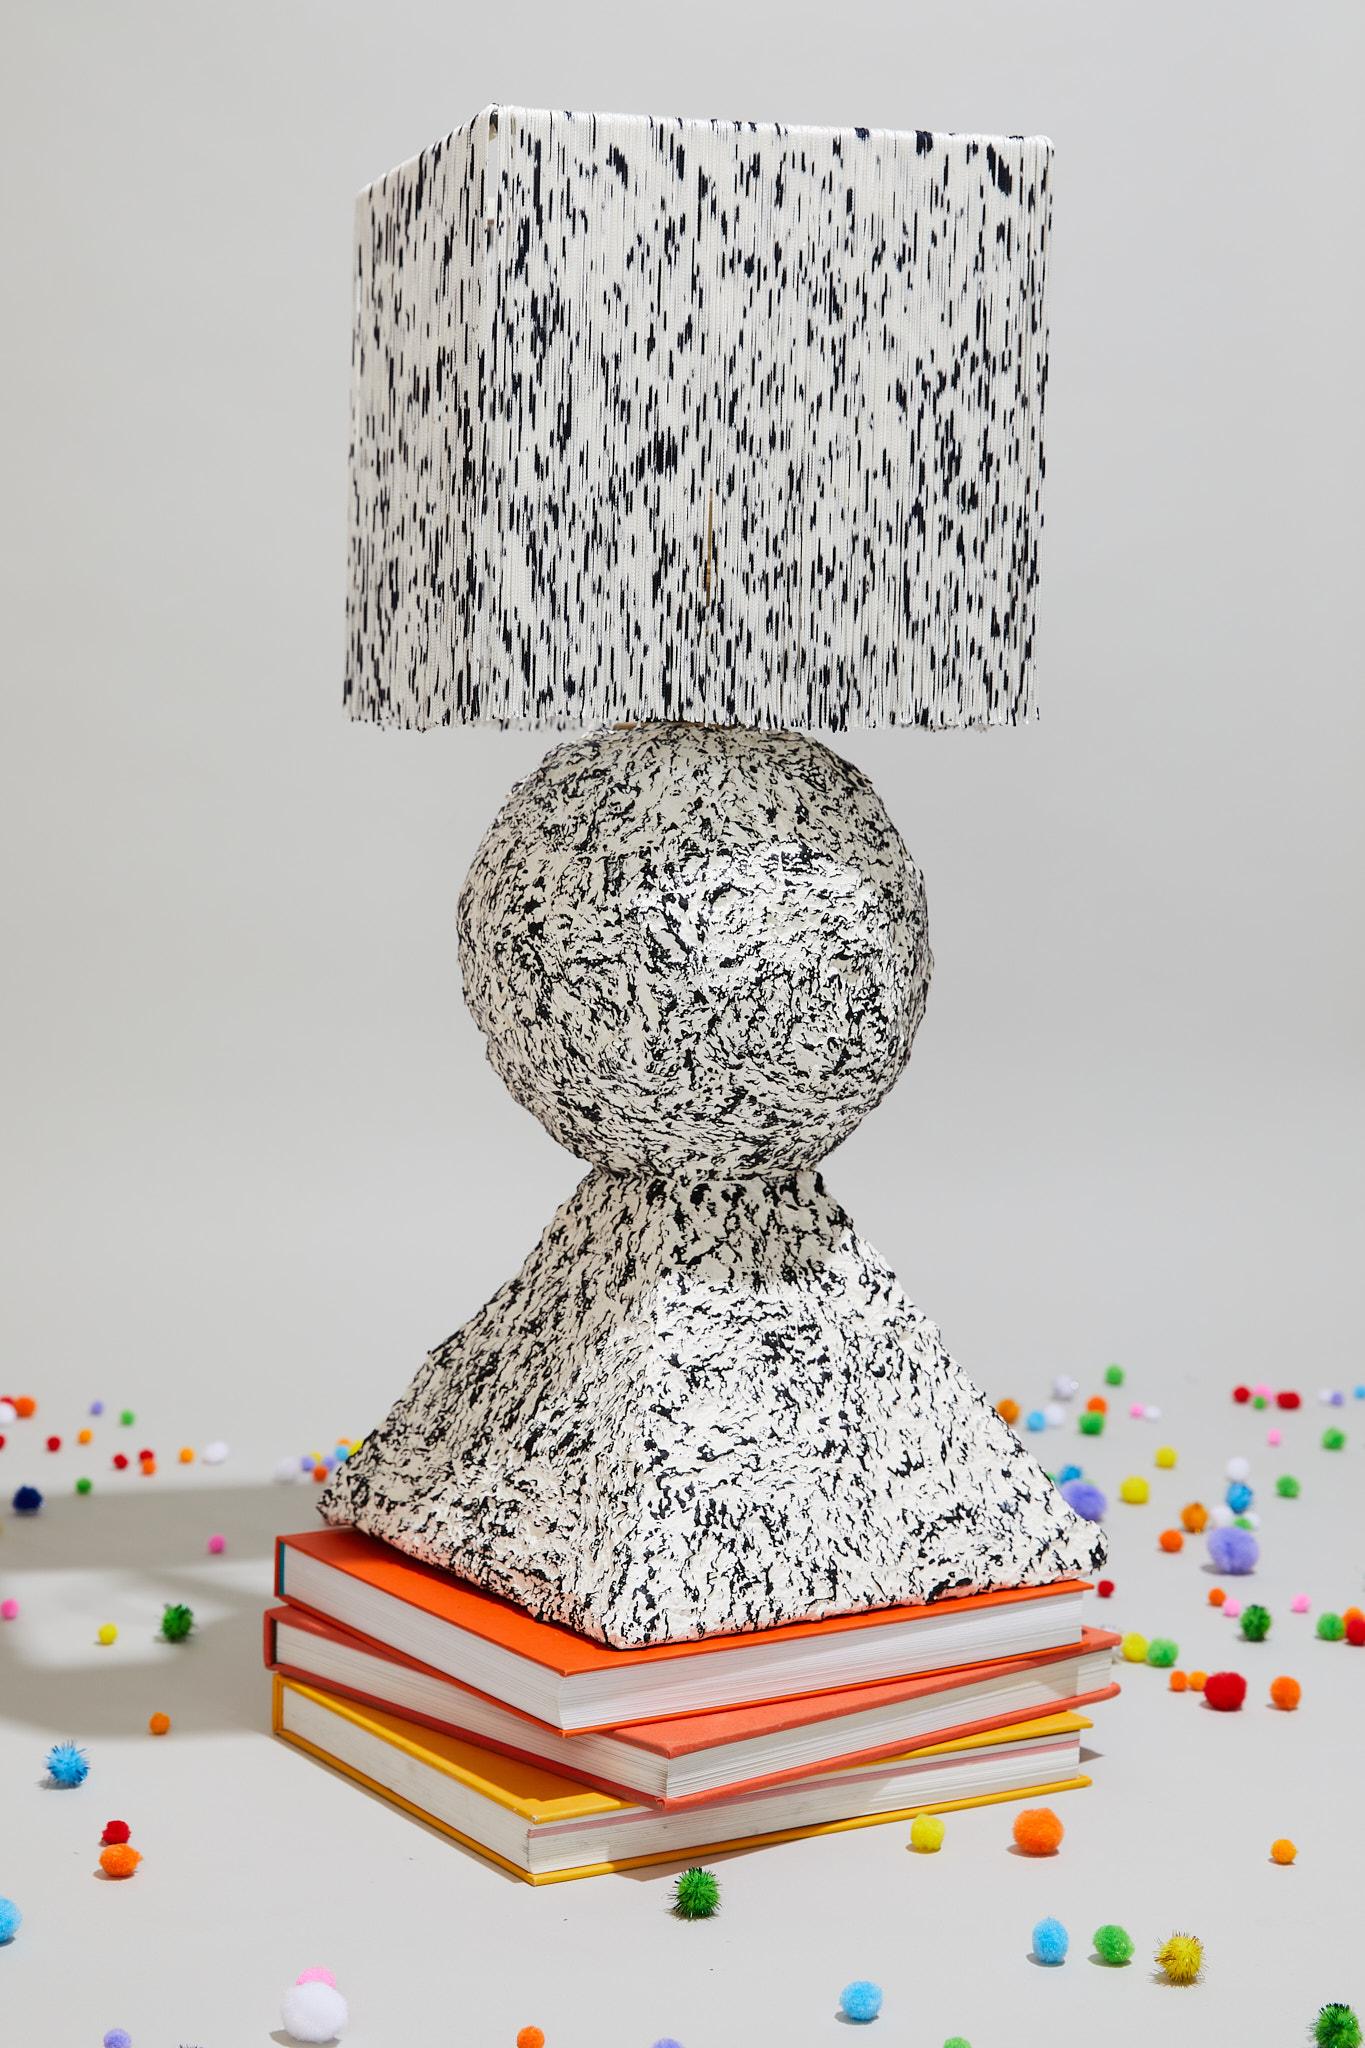 Inspired by architectural elements, the stack lamp plays with balance and form of the fundamental shapes of building. Hand painted, patterned surfaces pair with hand-dyed and knotted fringe shades to highlight the ephemeral and playful qualities of